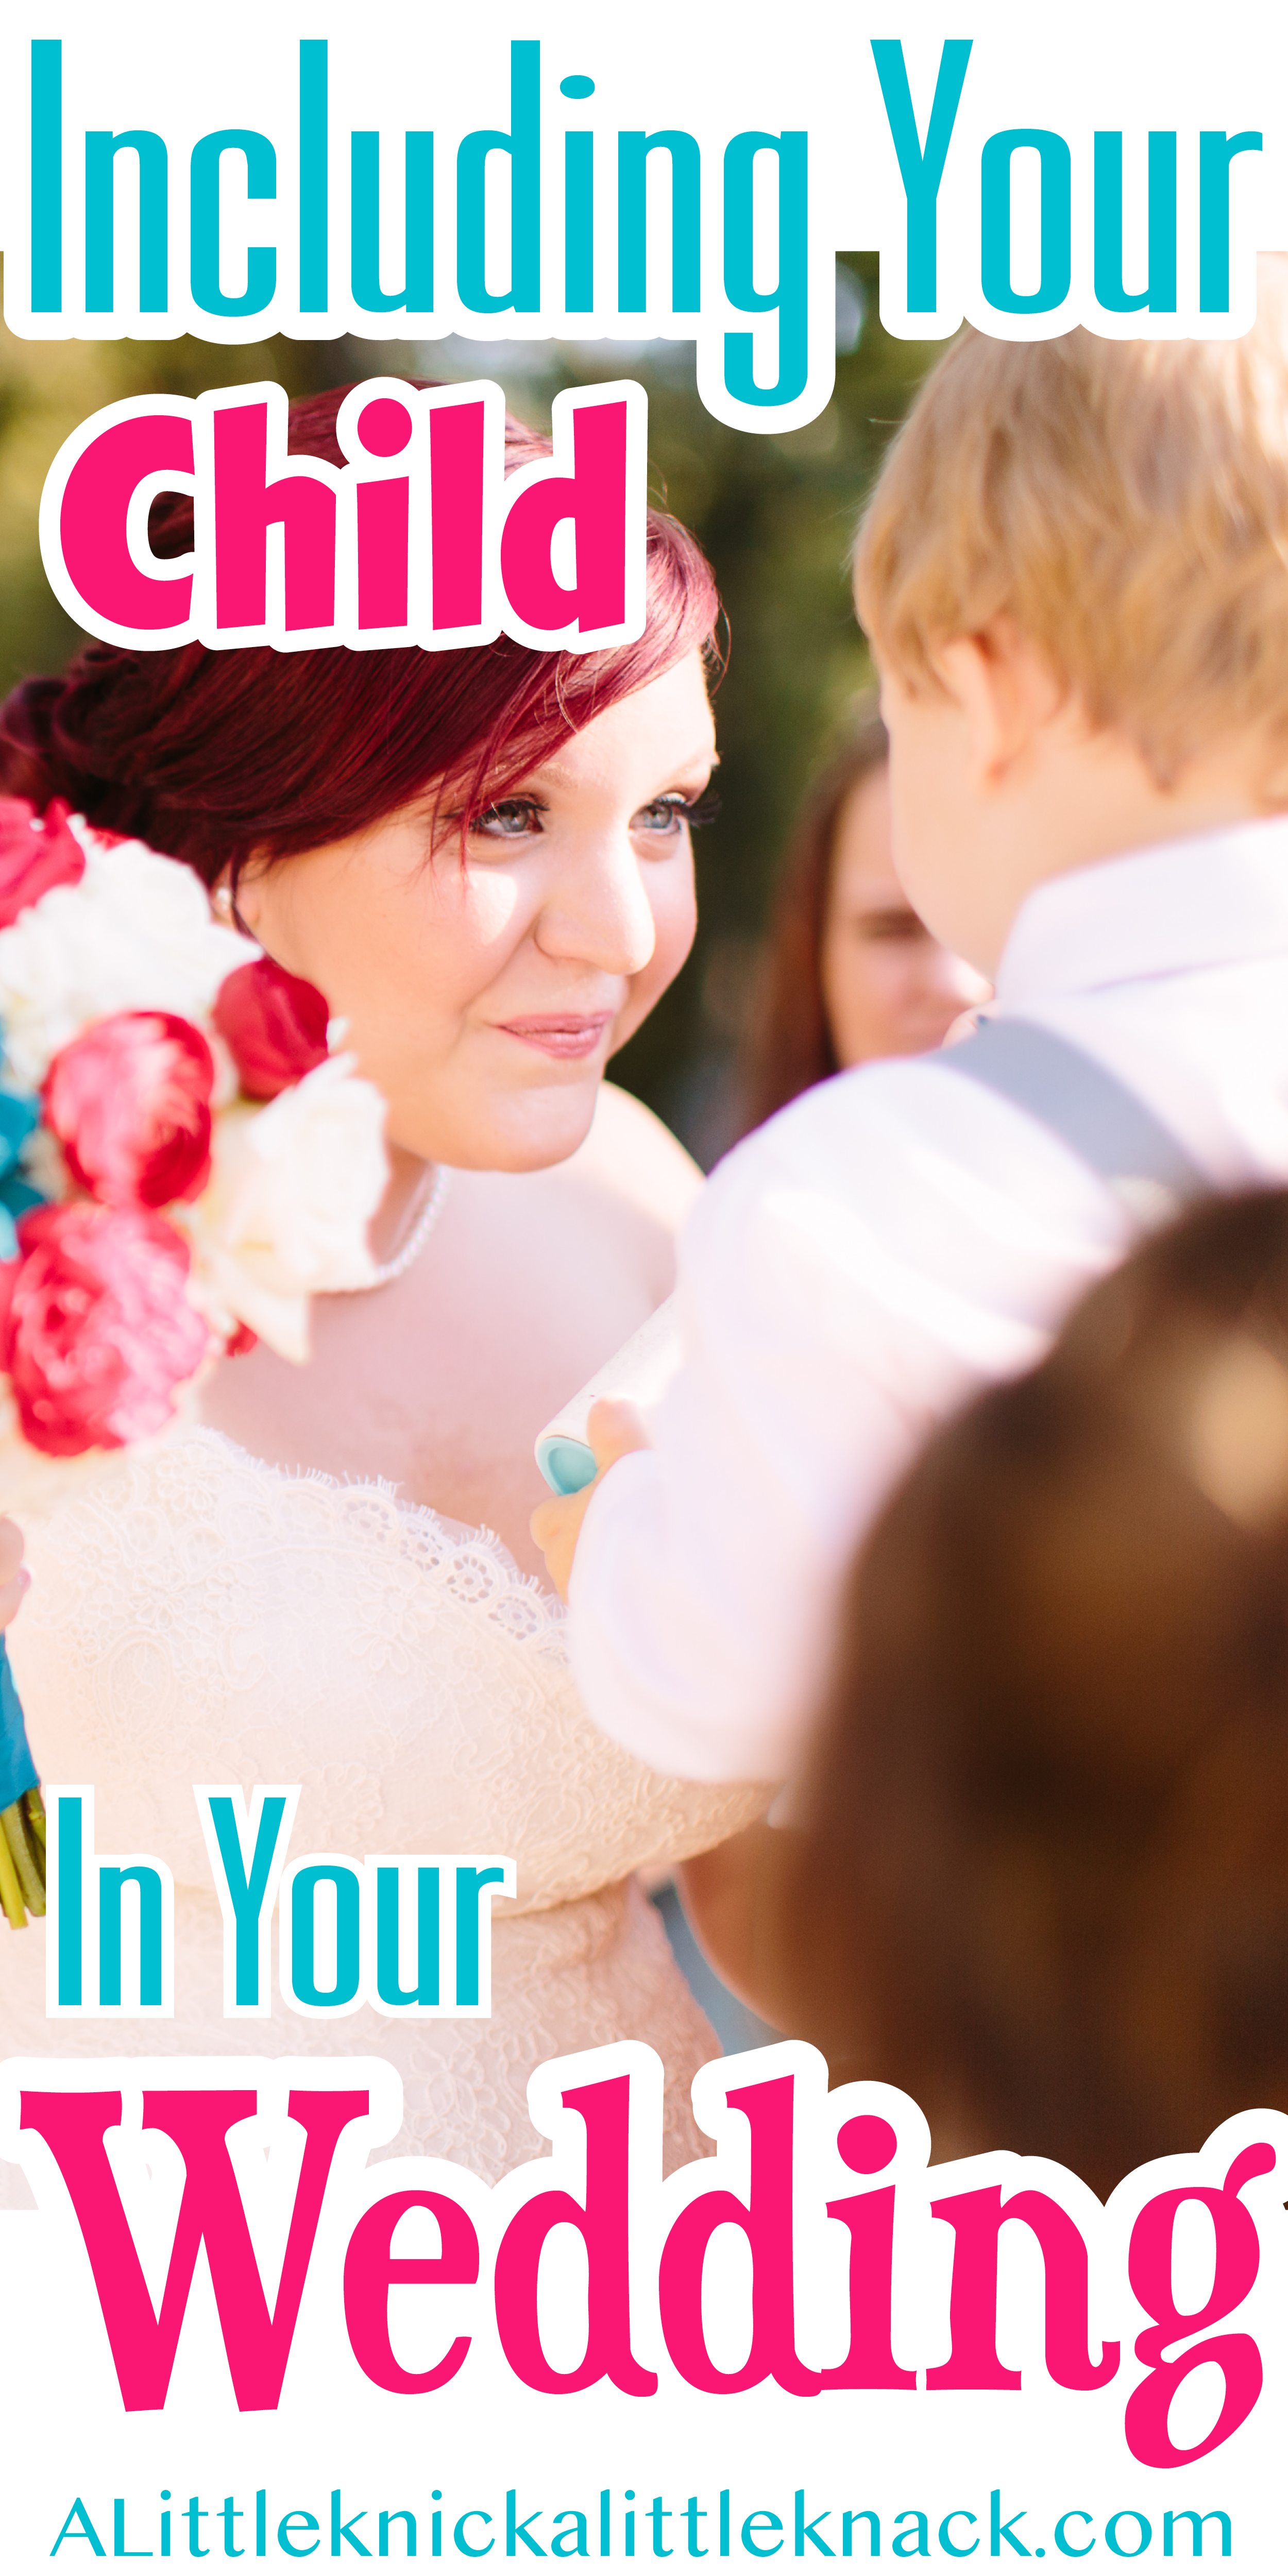 A bride folding a bouquet smiles at her young child with a text overlay